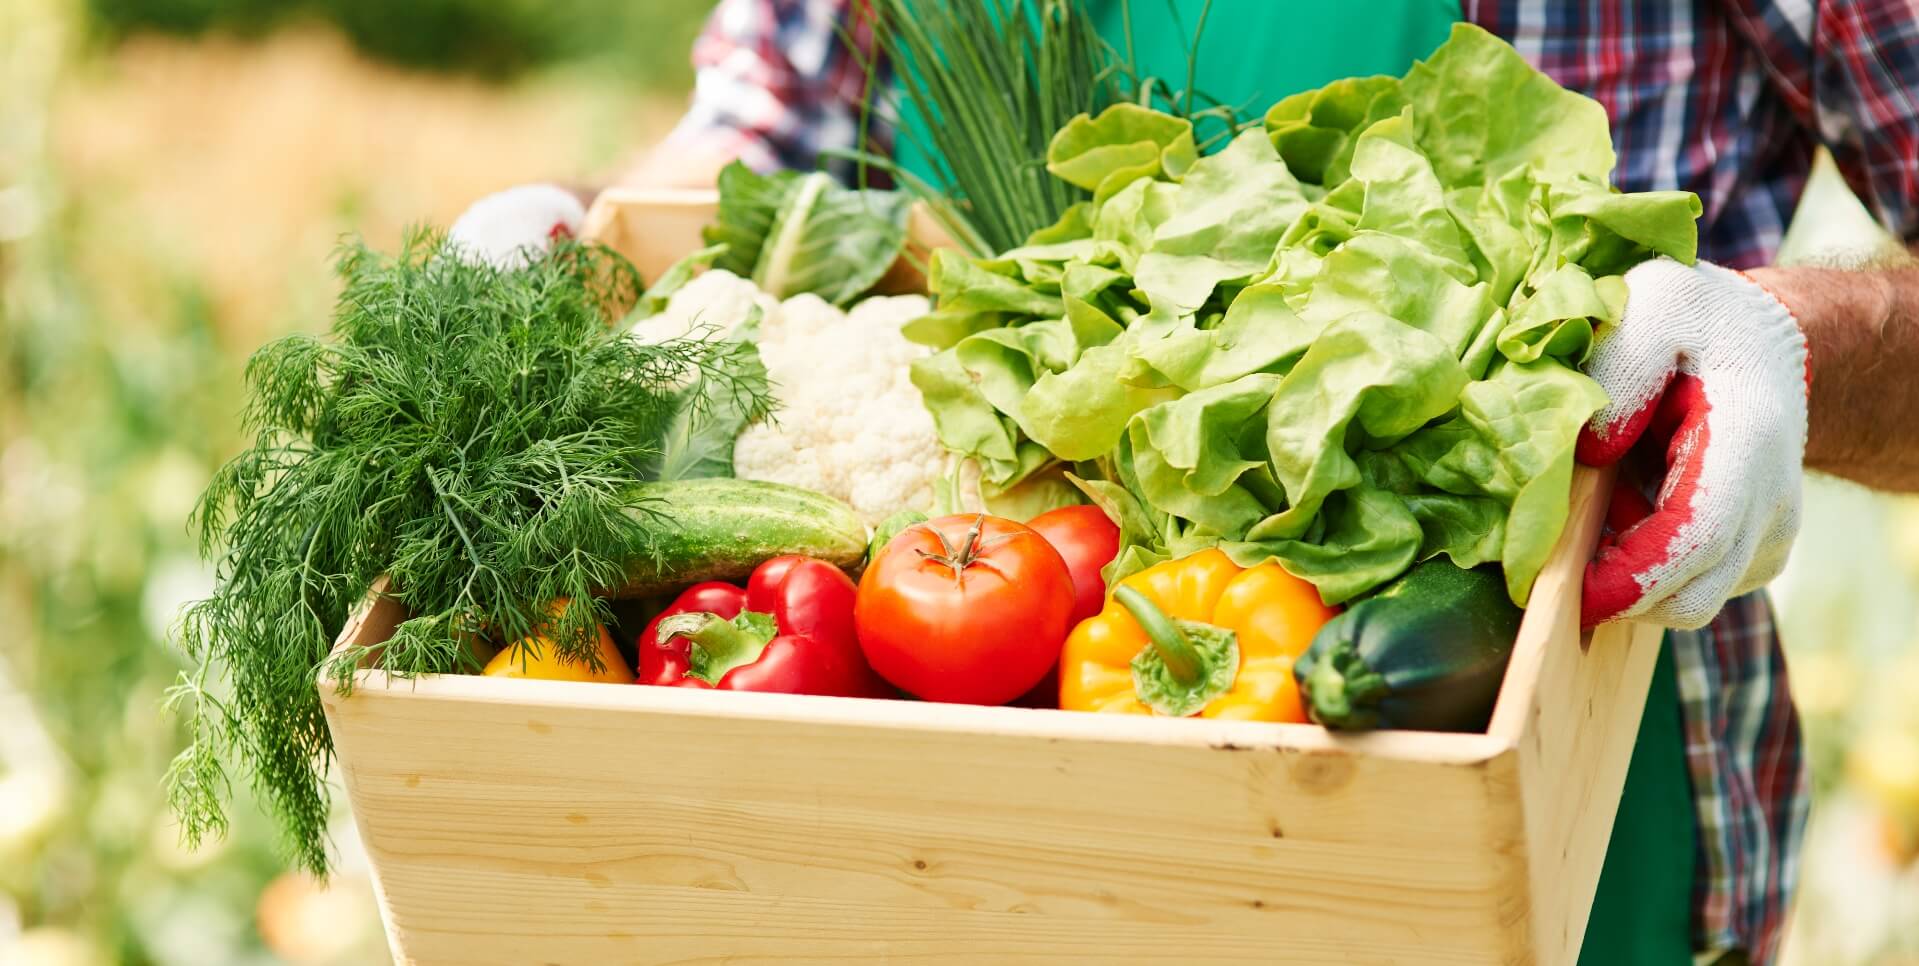 Crate full of vegetables.